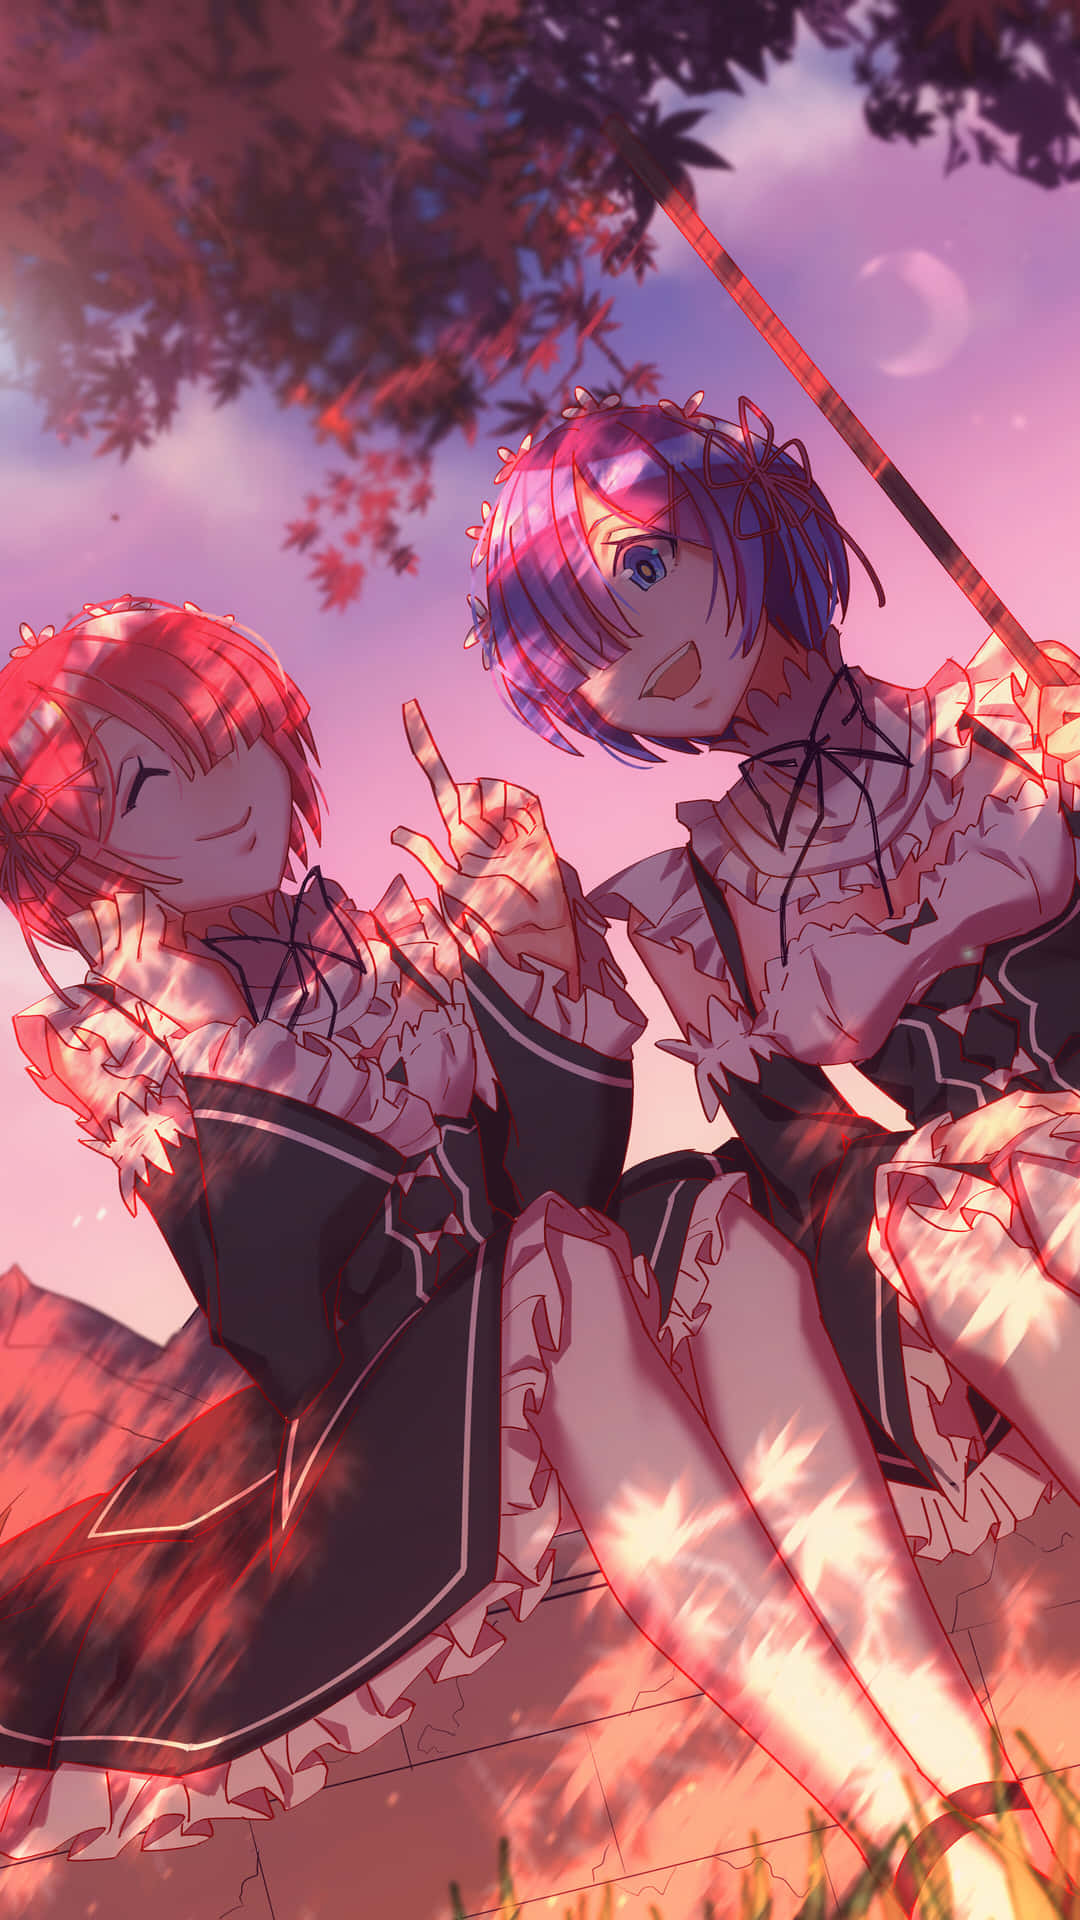 Two Anime Girls Sitting On A Hill With A Tree In The Background Wallpaper